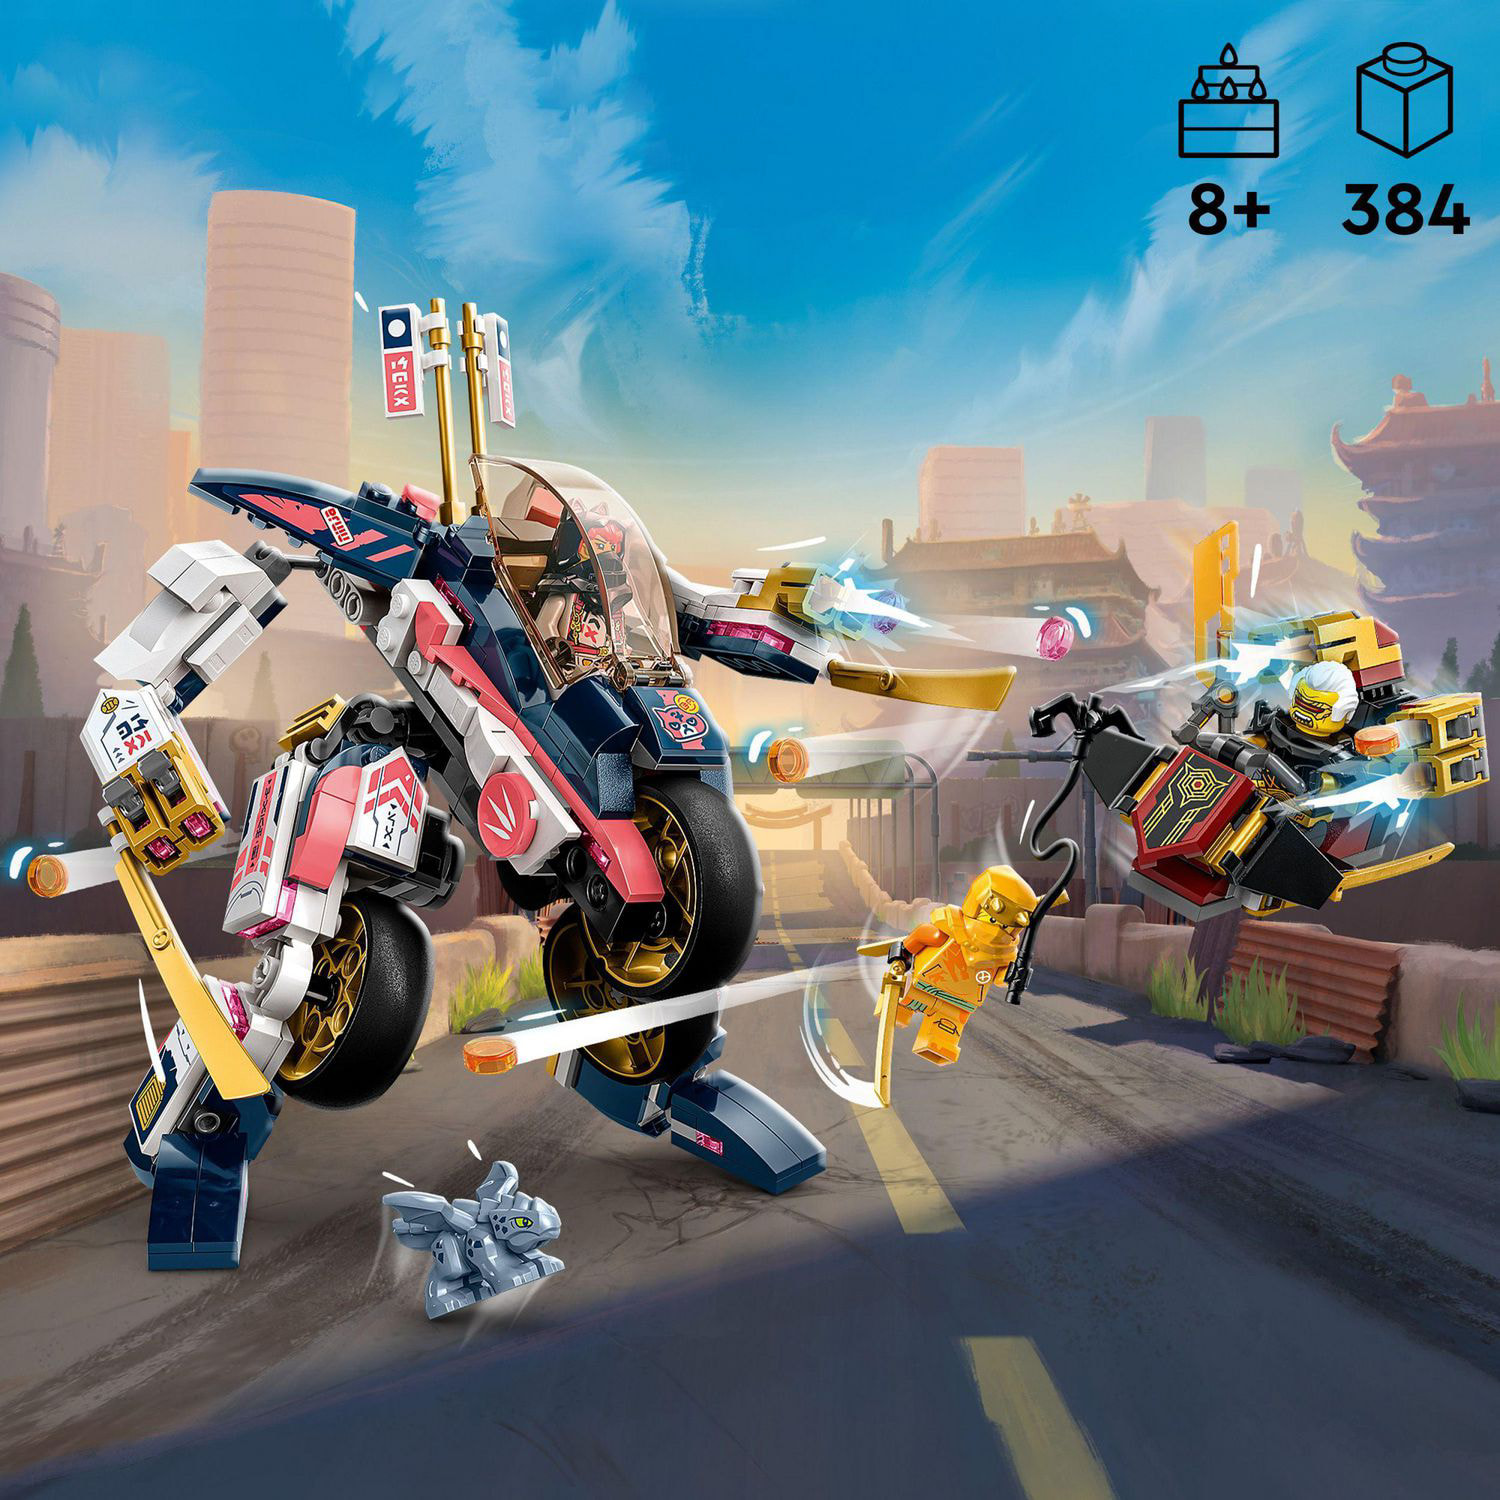 LEGO NINJAGO Sora's Transforming Mech Bike Racer 71792 Building Toys for  Kids, Featuring a Mech Ninja bike racer, a Baby Dragon and 3 Minifigures,  Gift for Kids Aged 8+, Includes 384 Pieces, Ages 8+ 